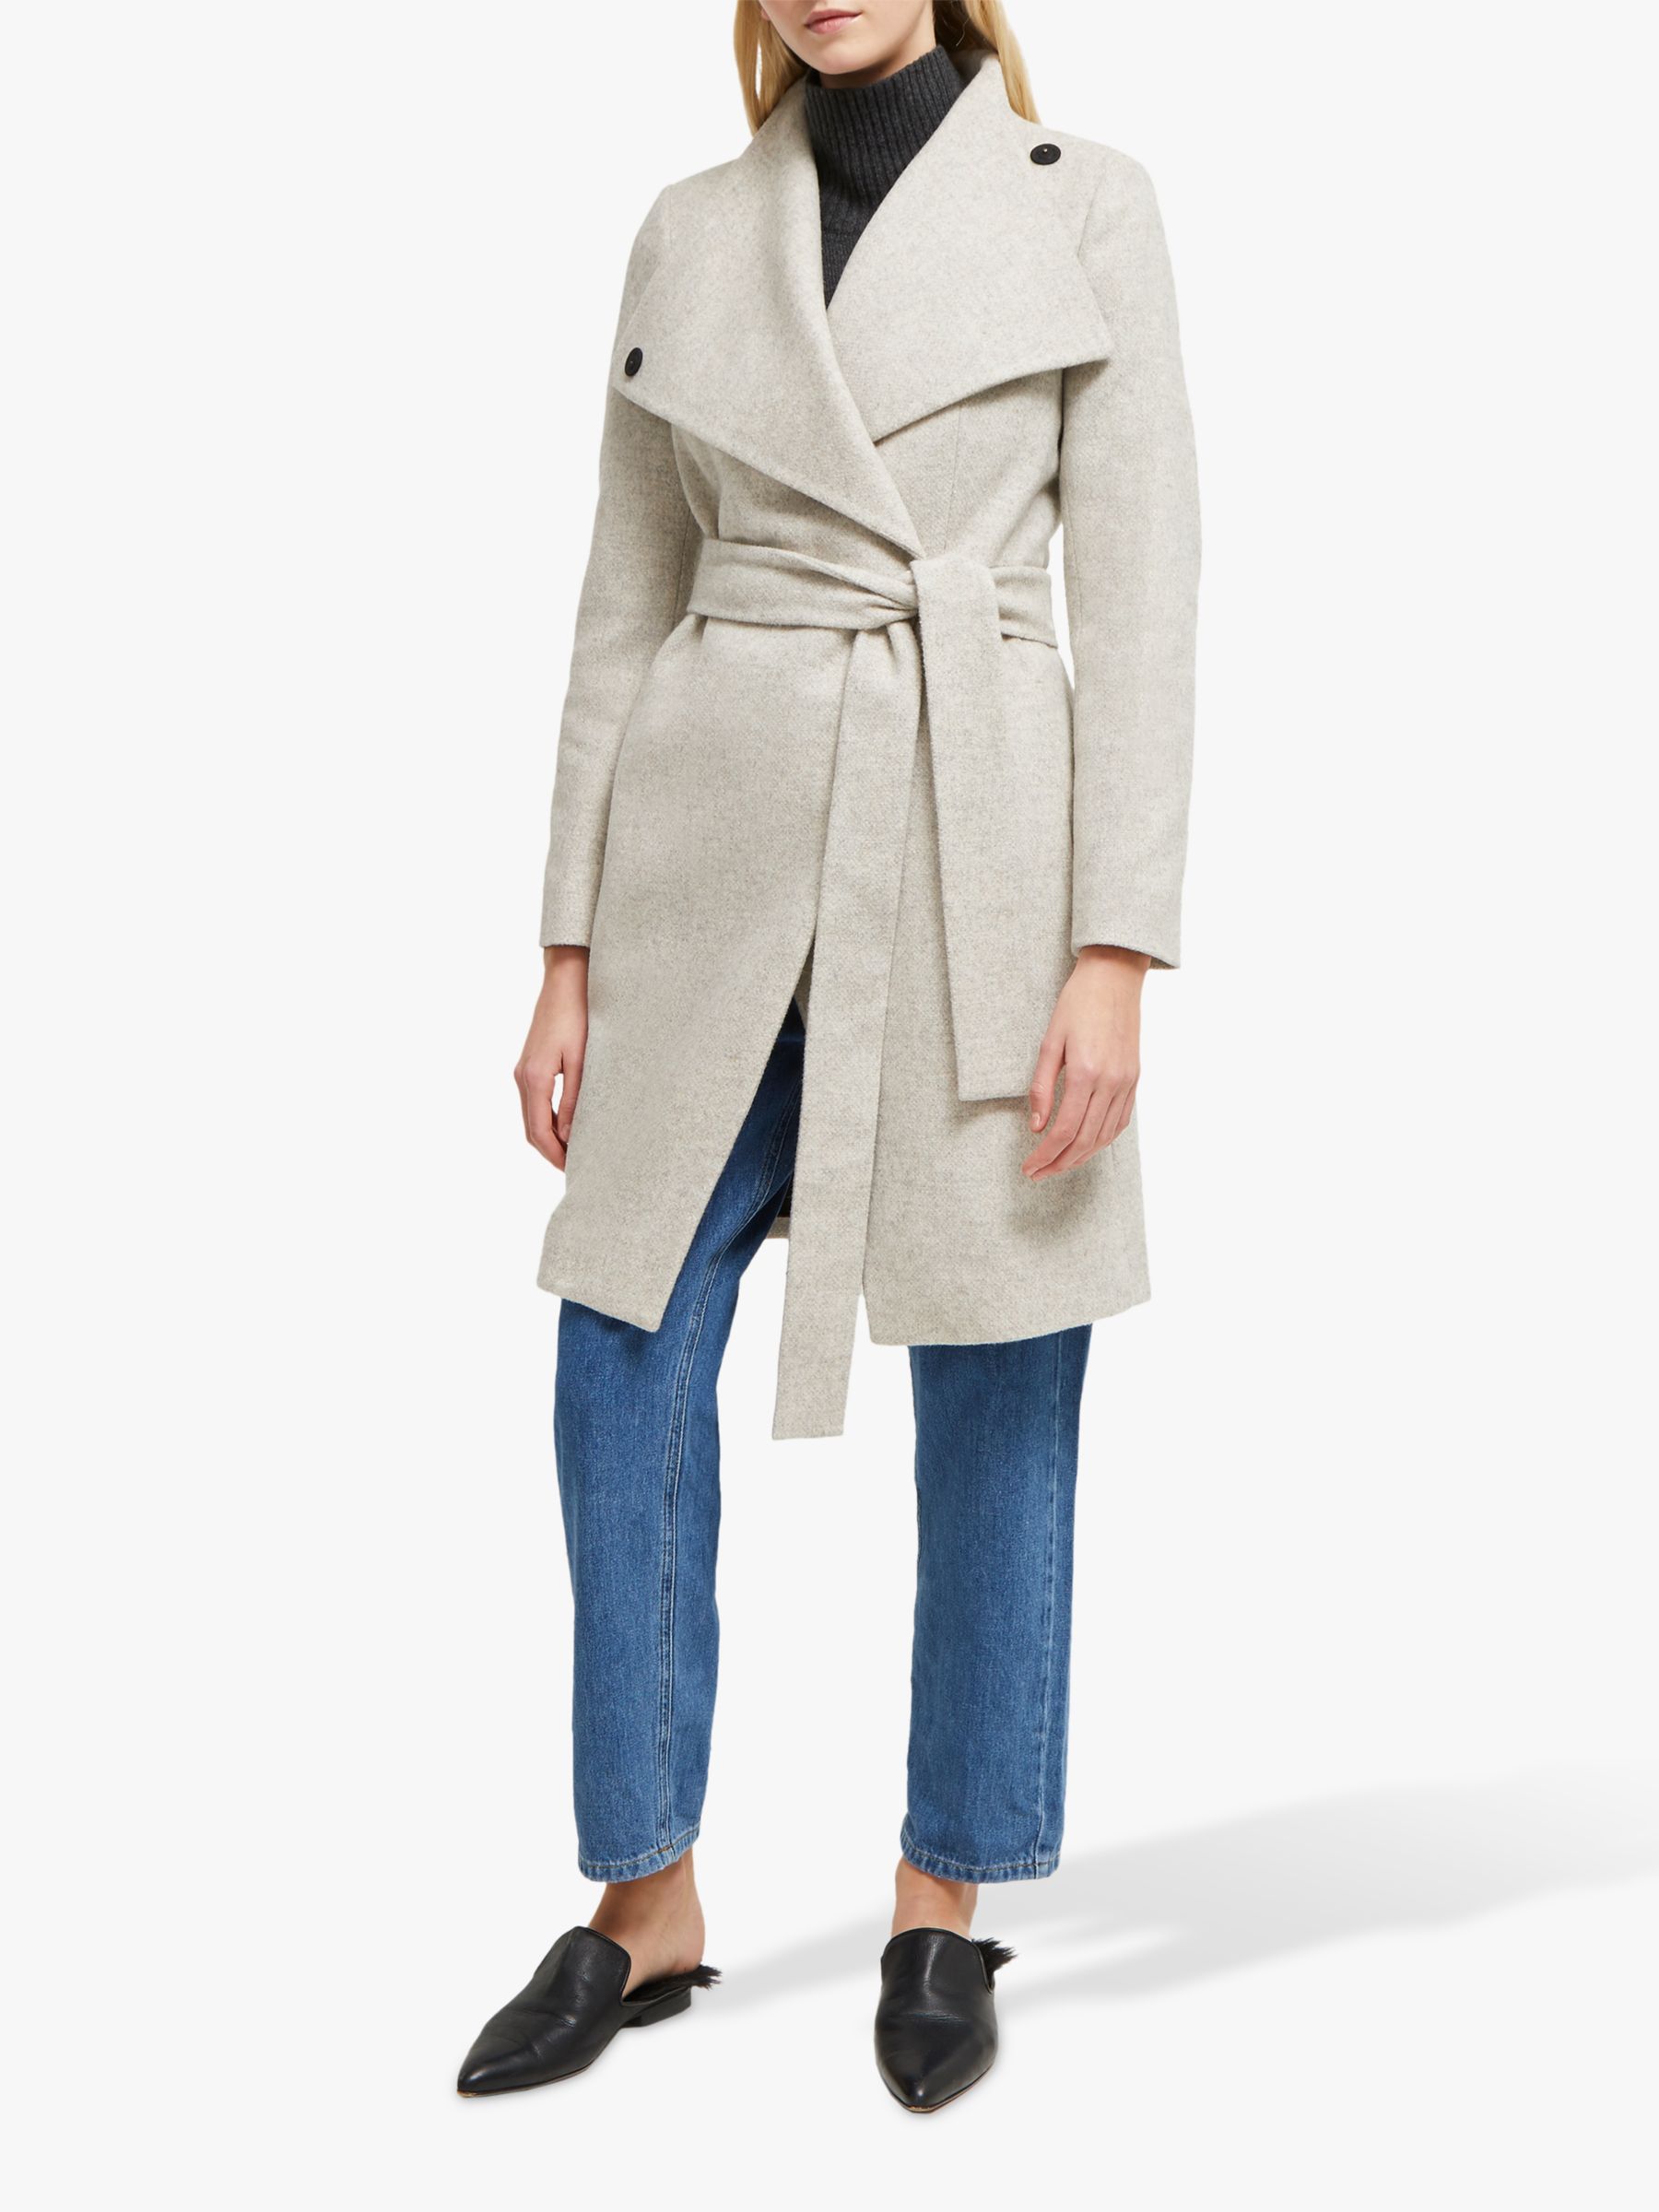 French Connection Bellarosa Belted Coat, Oatmeal